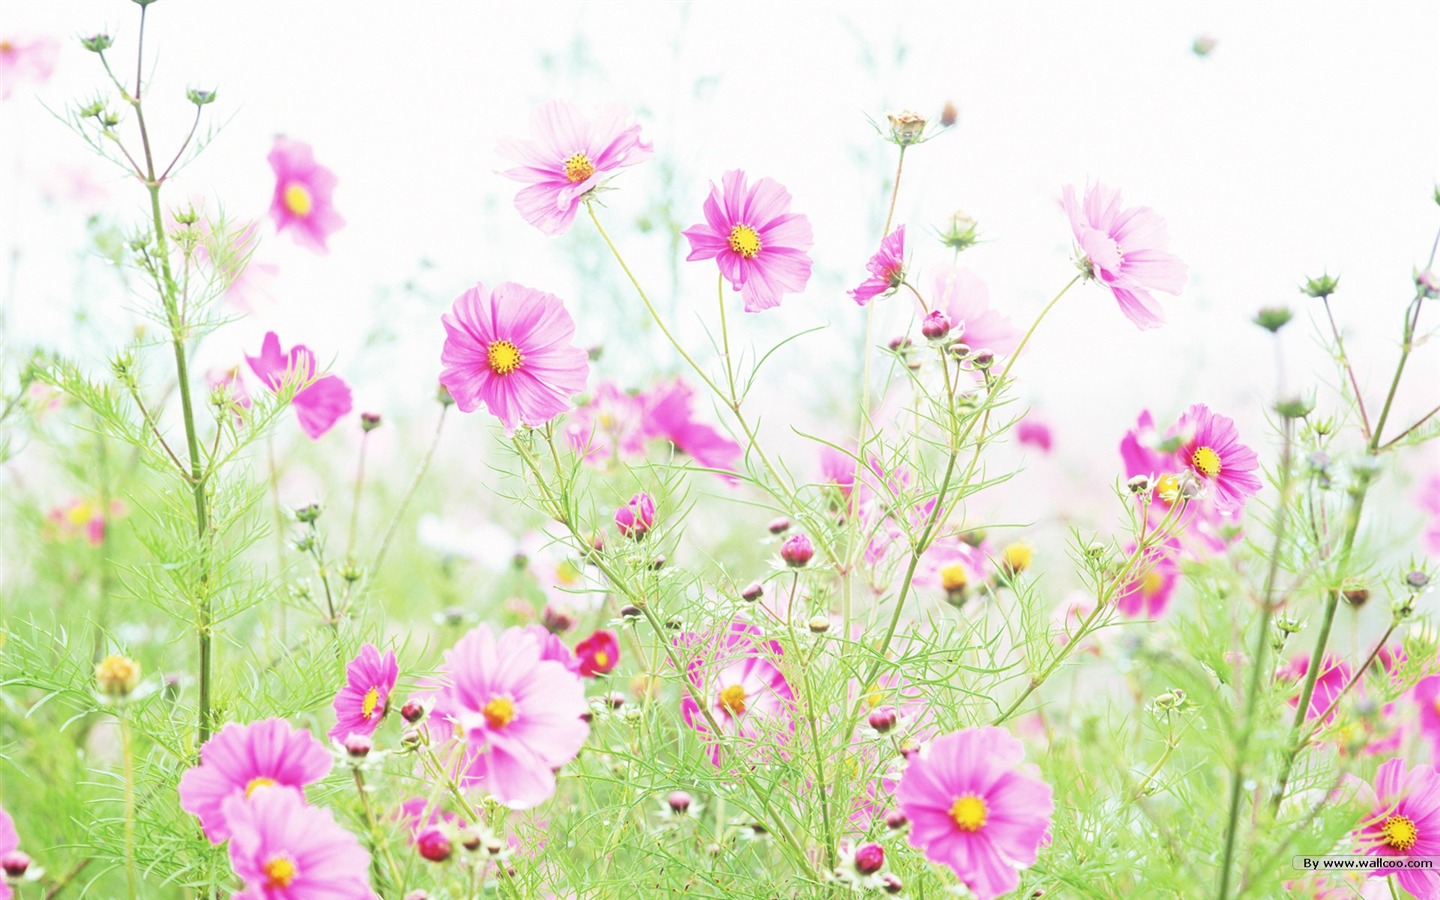 Fresh style Flowers Wallpapers #3 - 1440x900